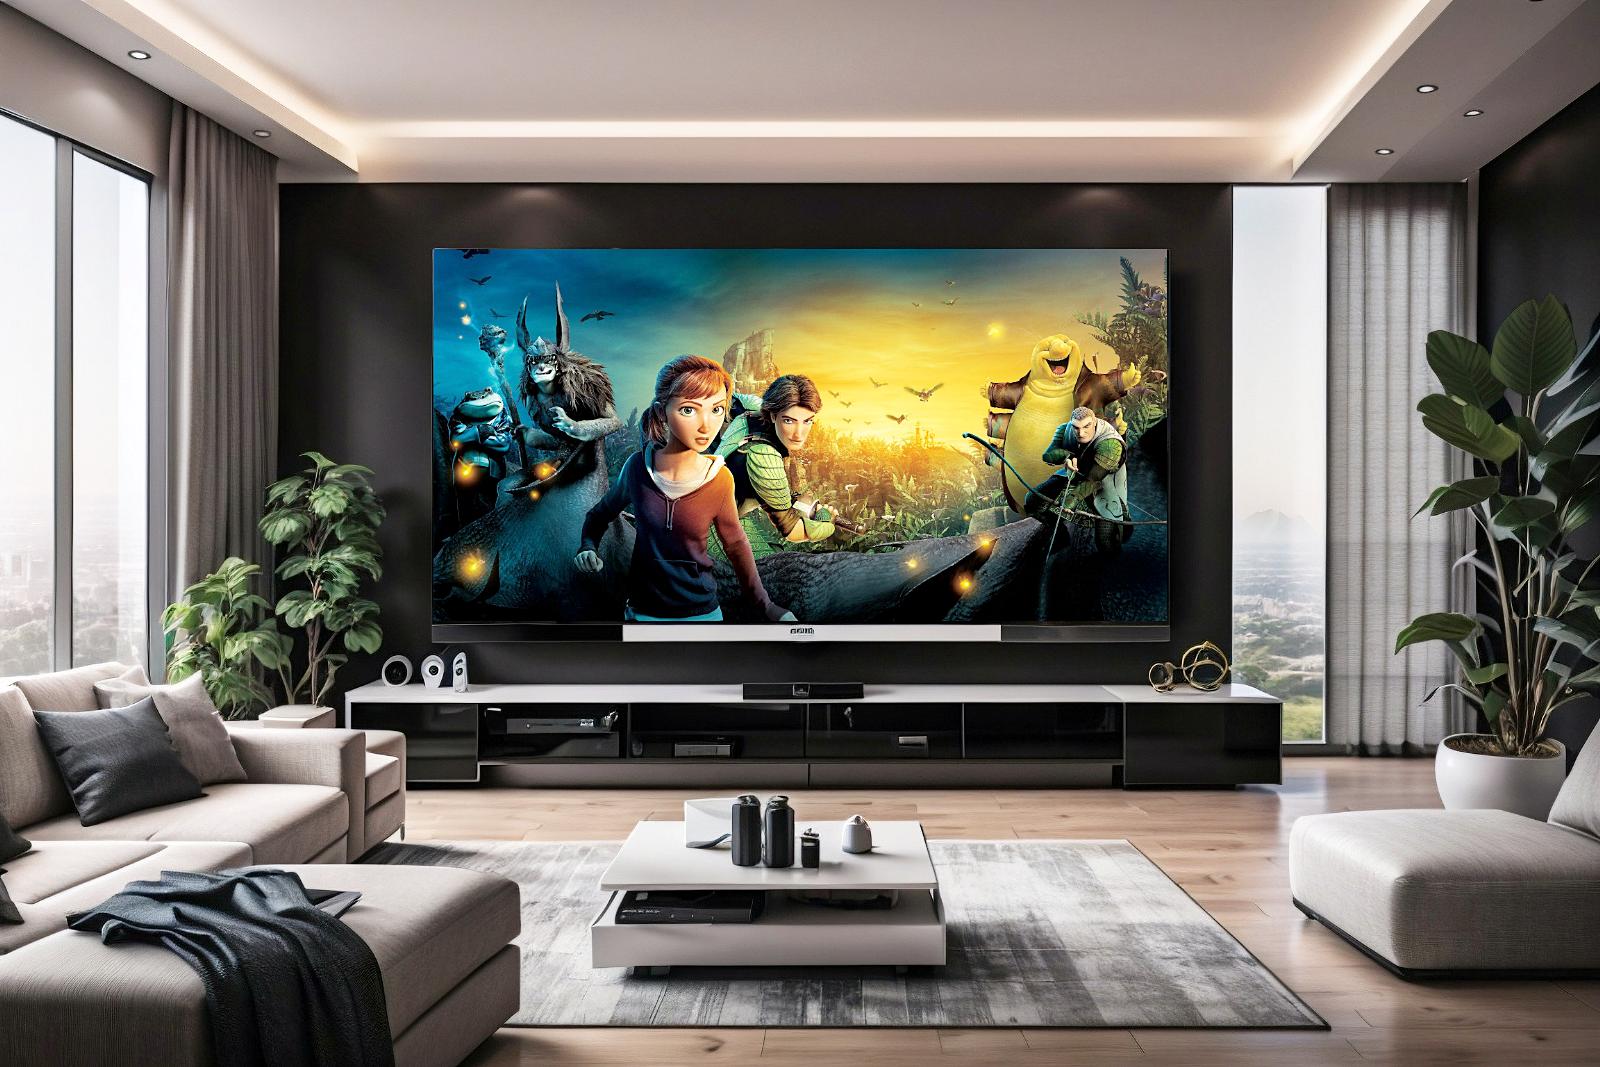 Smart Home Entertainment System